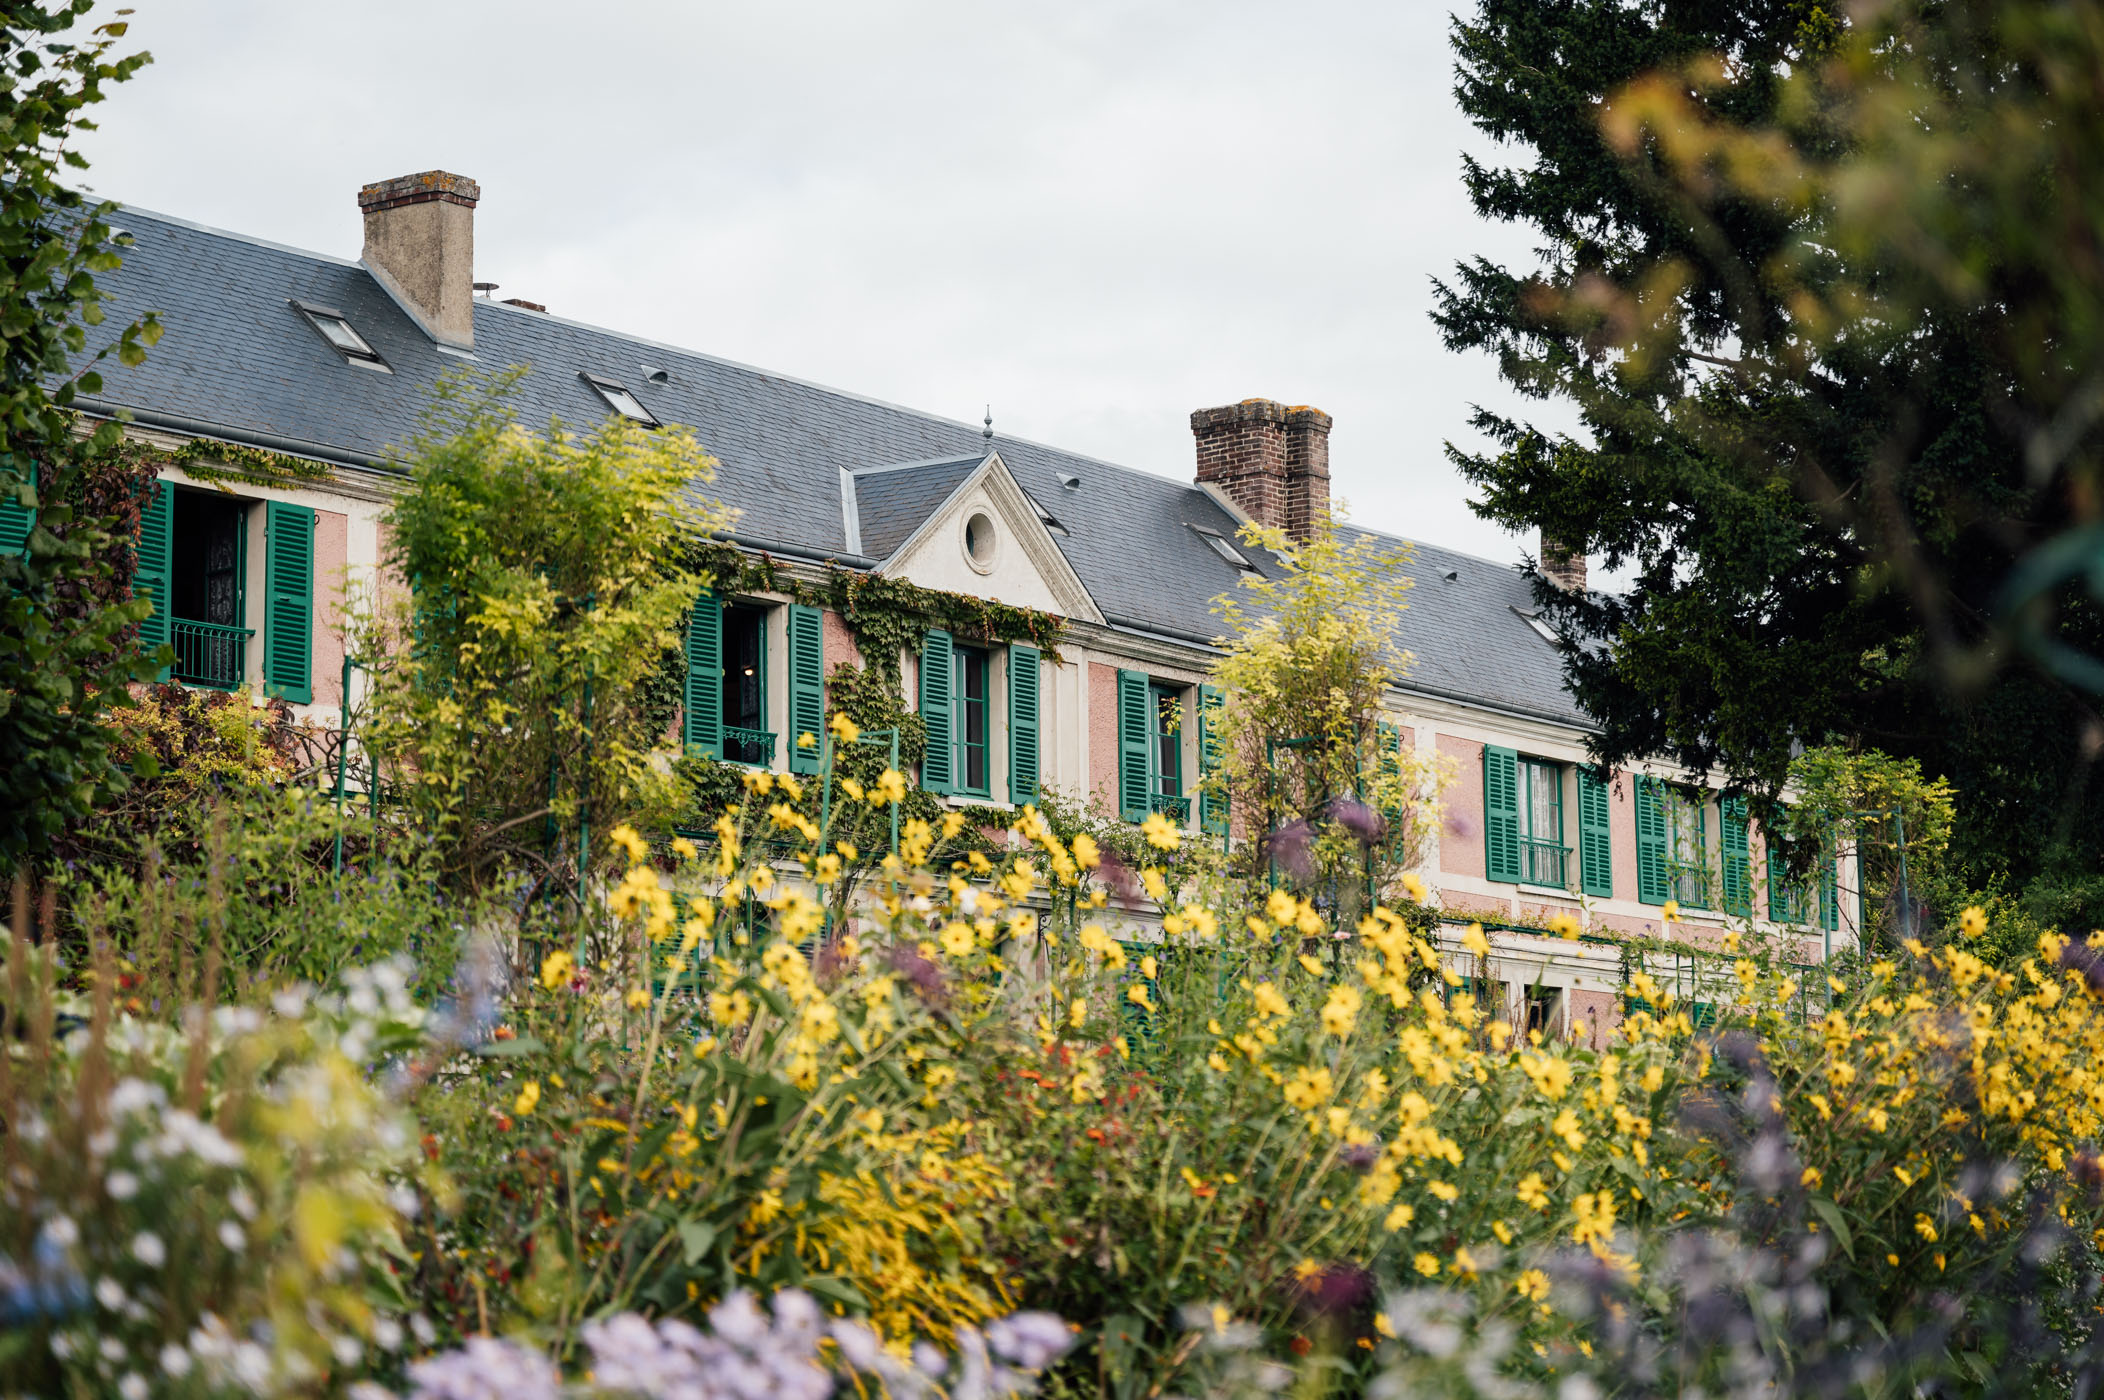 Monet's house and garden in Giverny Normandy